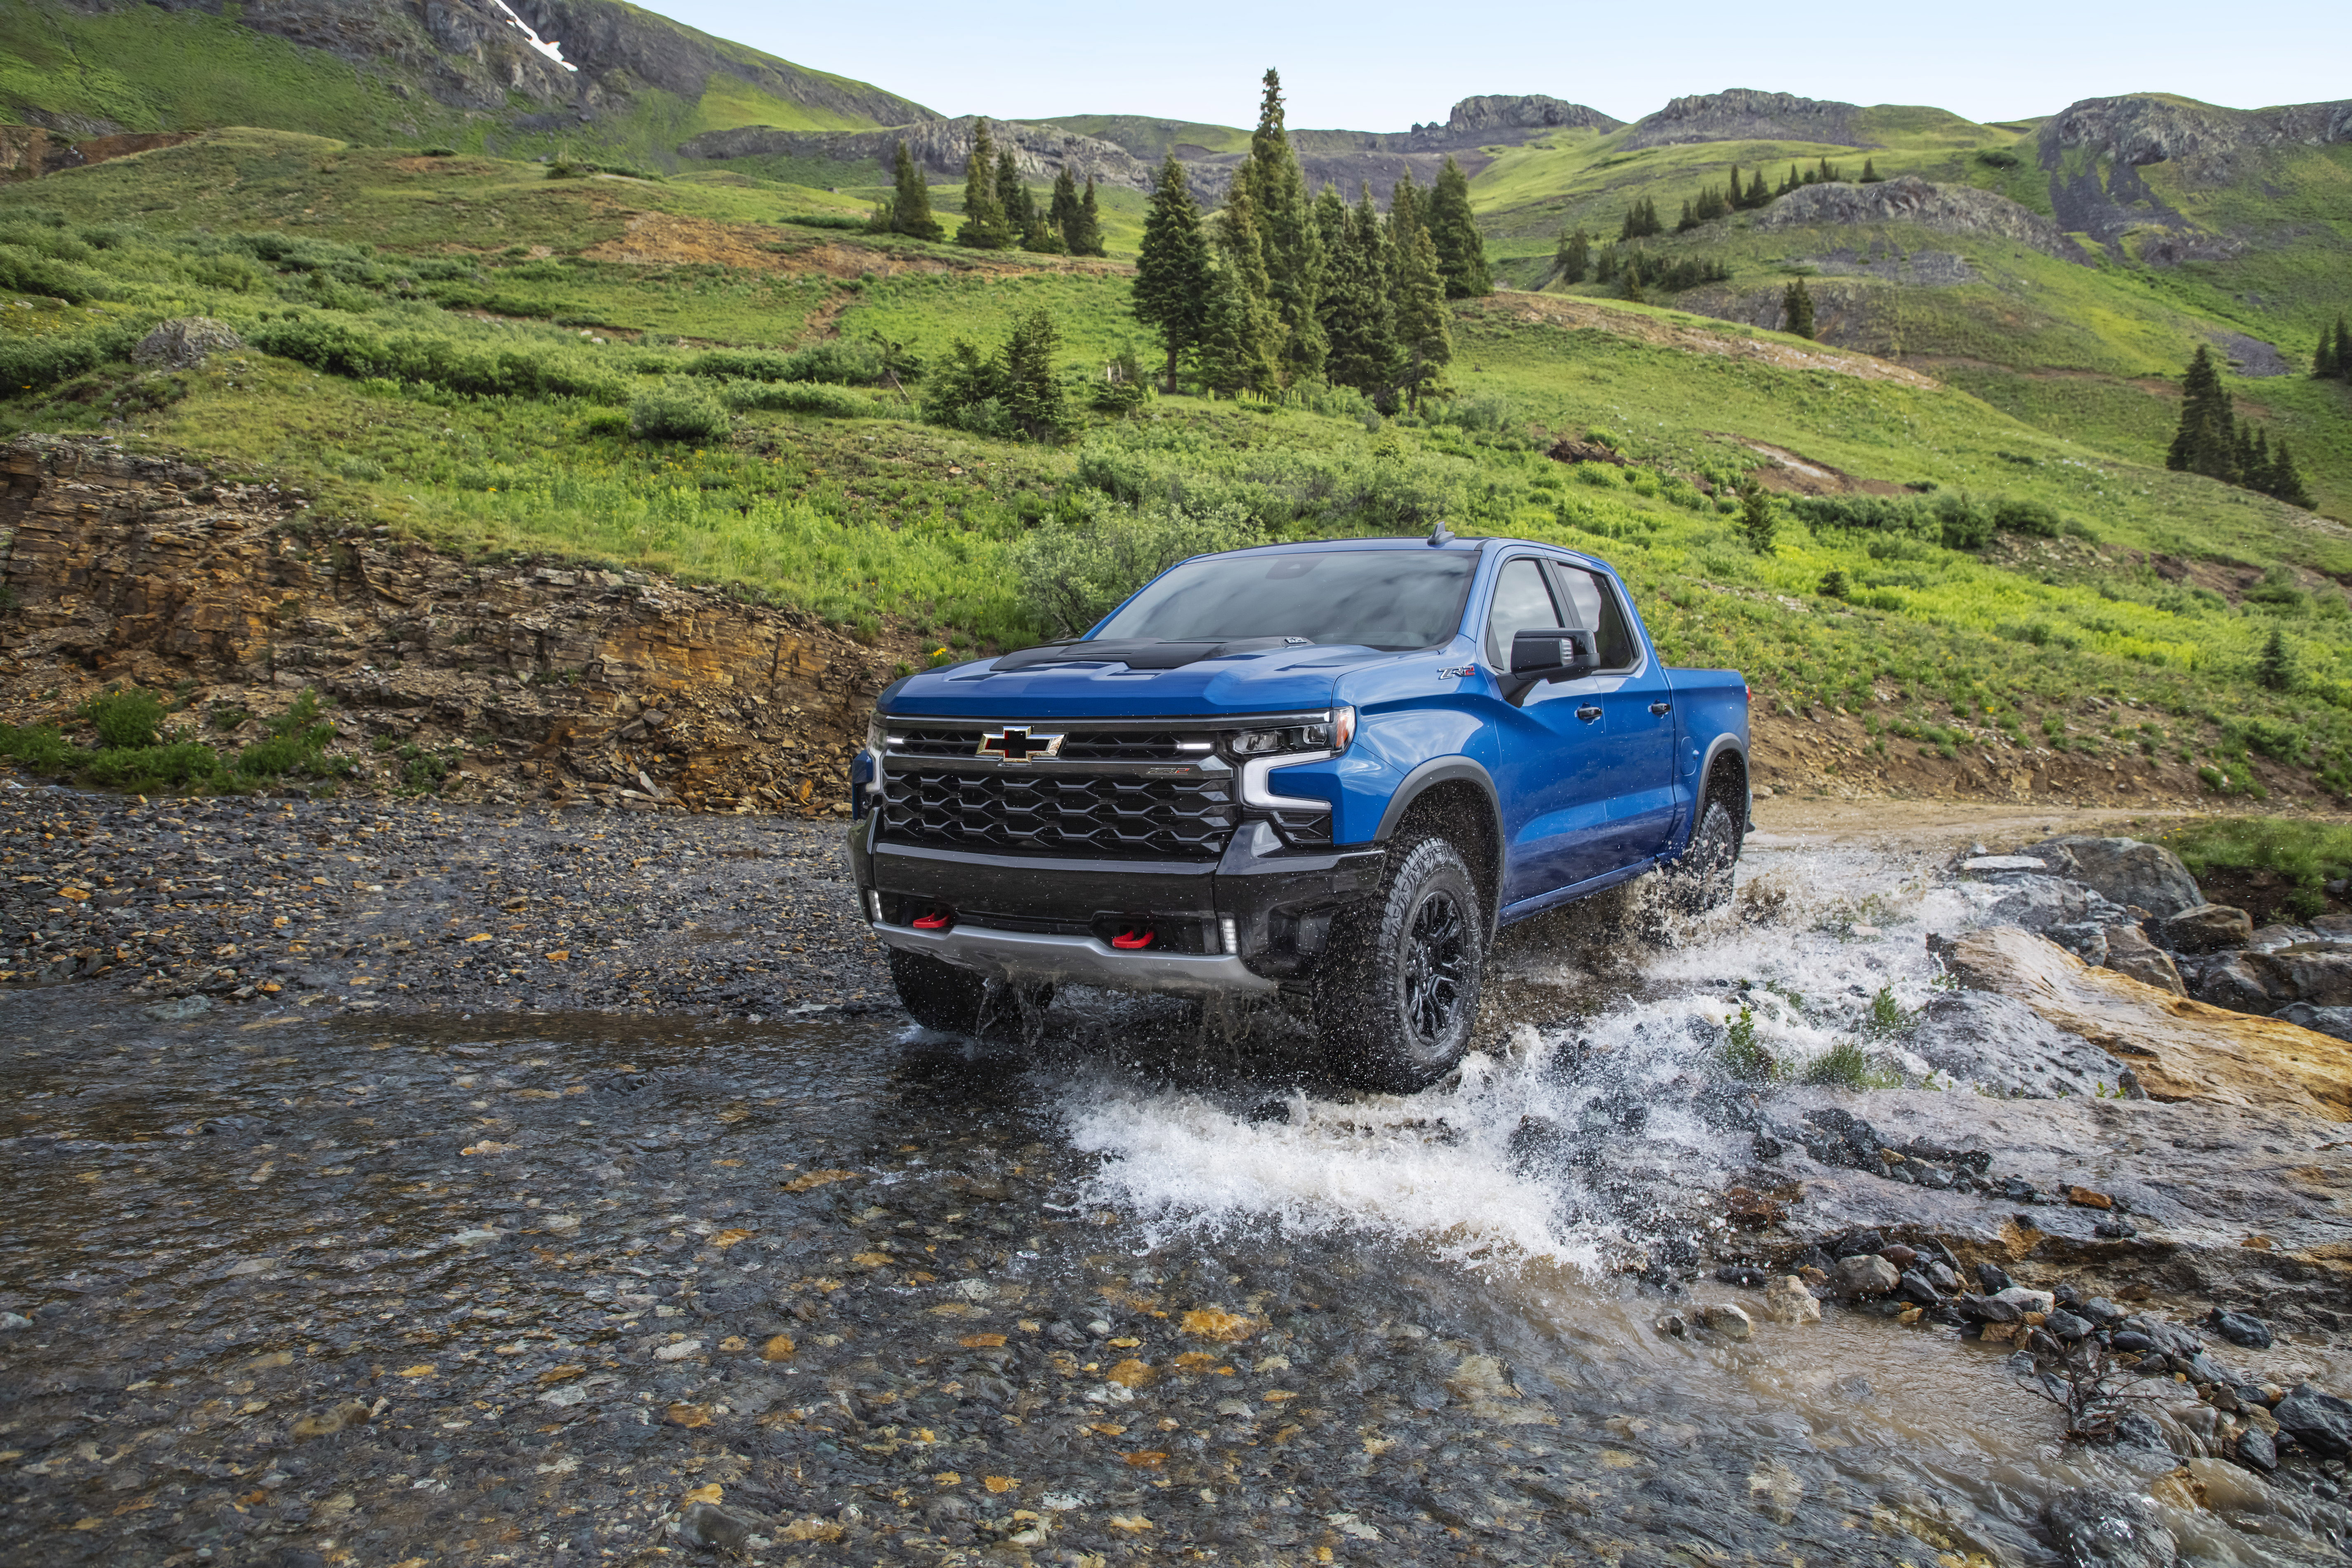 2022 Chevrolet Silverado ZR HD Cars, 4k Wallpaper, Image, Background, Photo and Picture